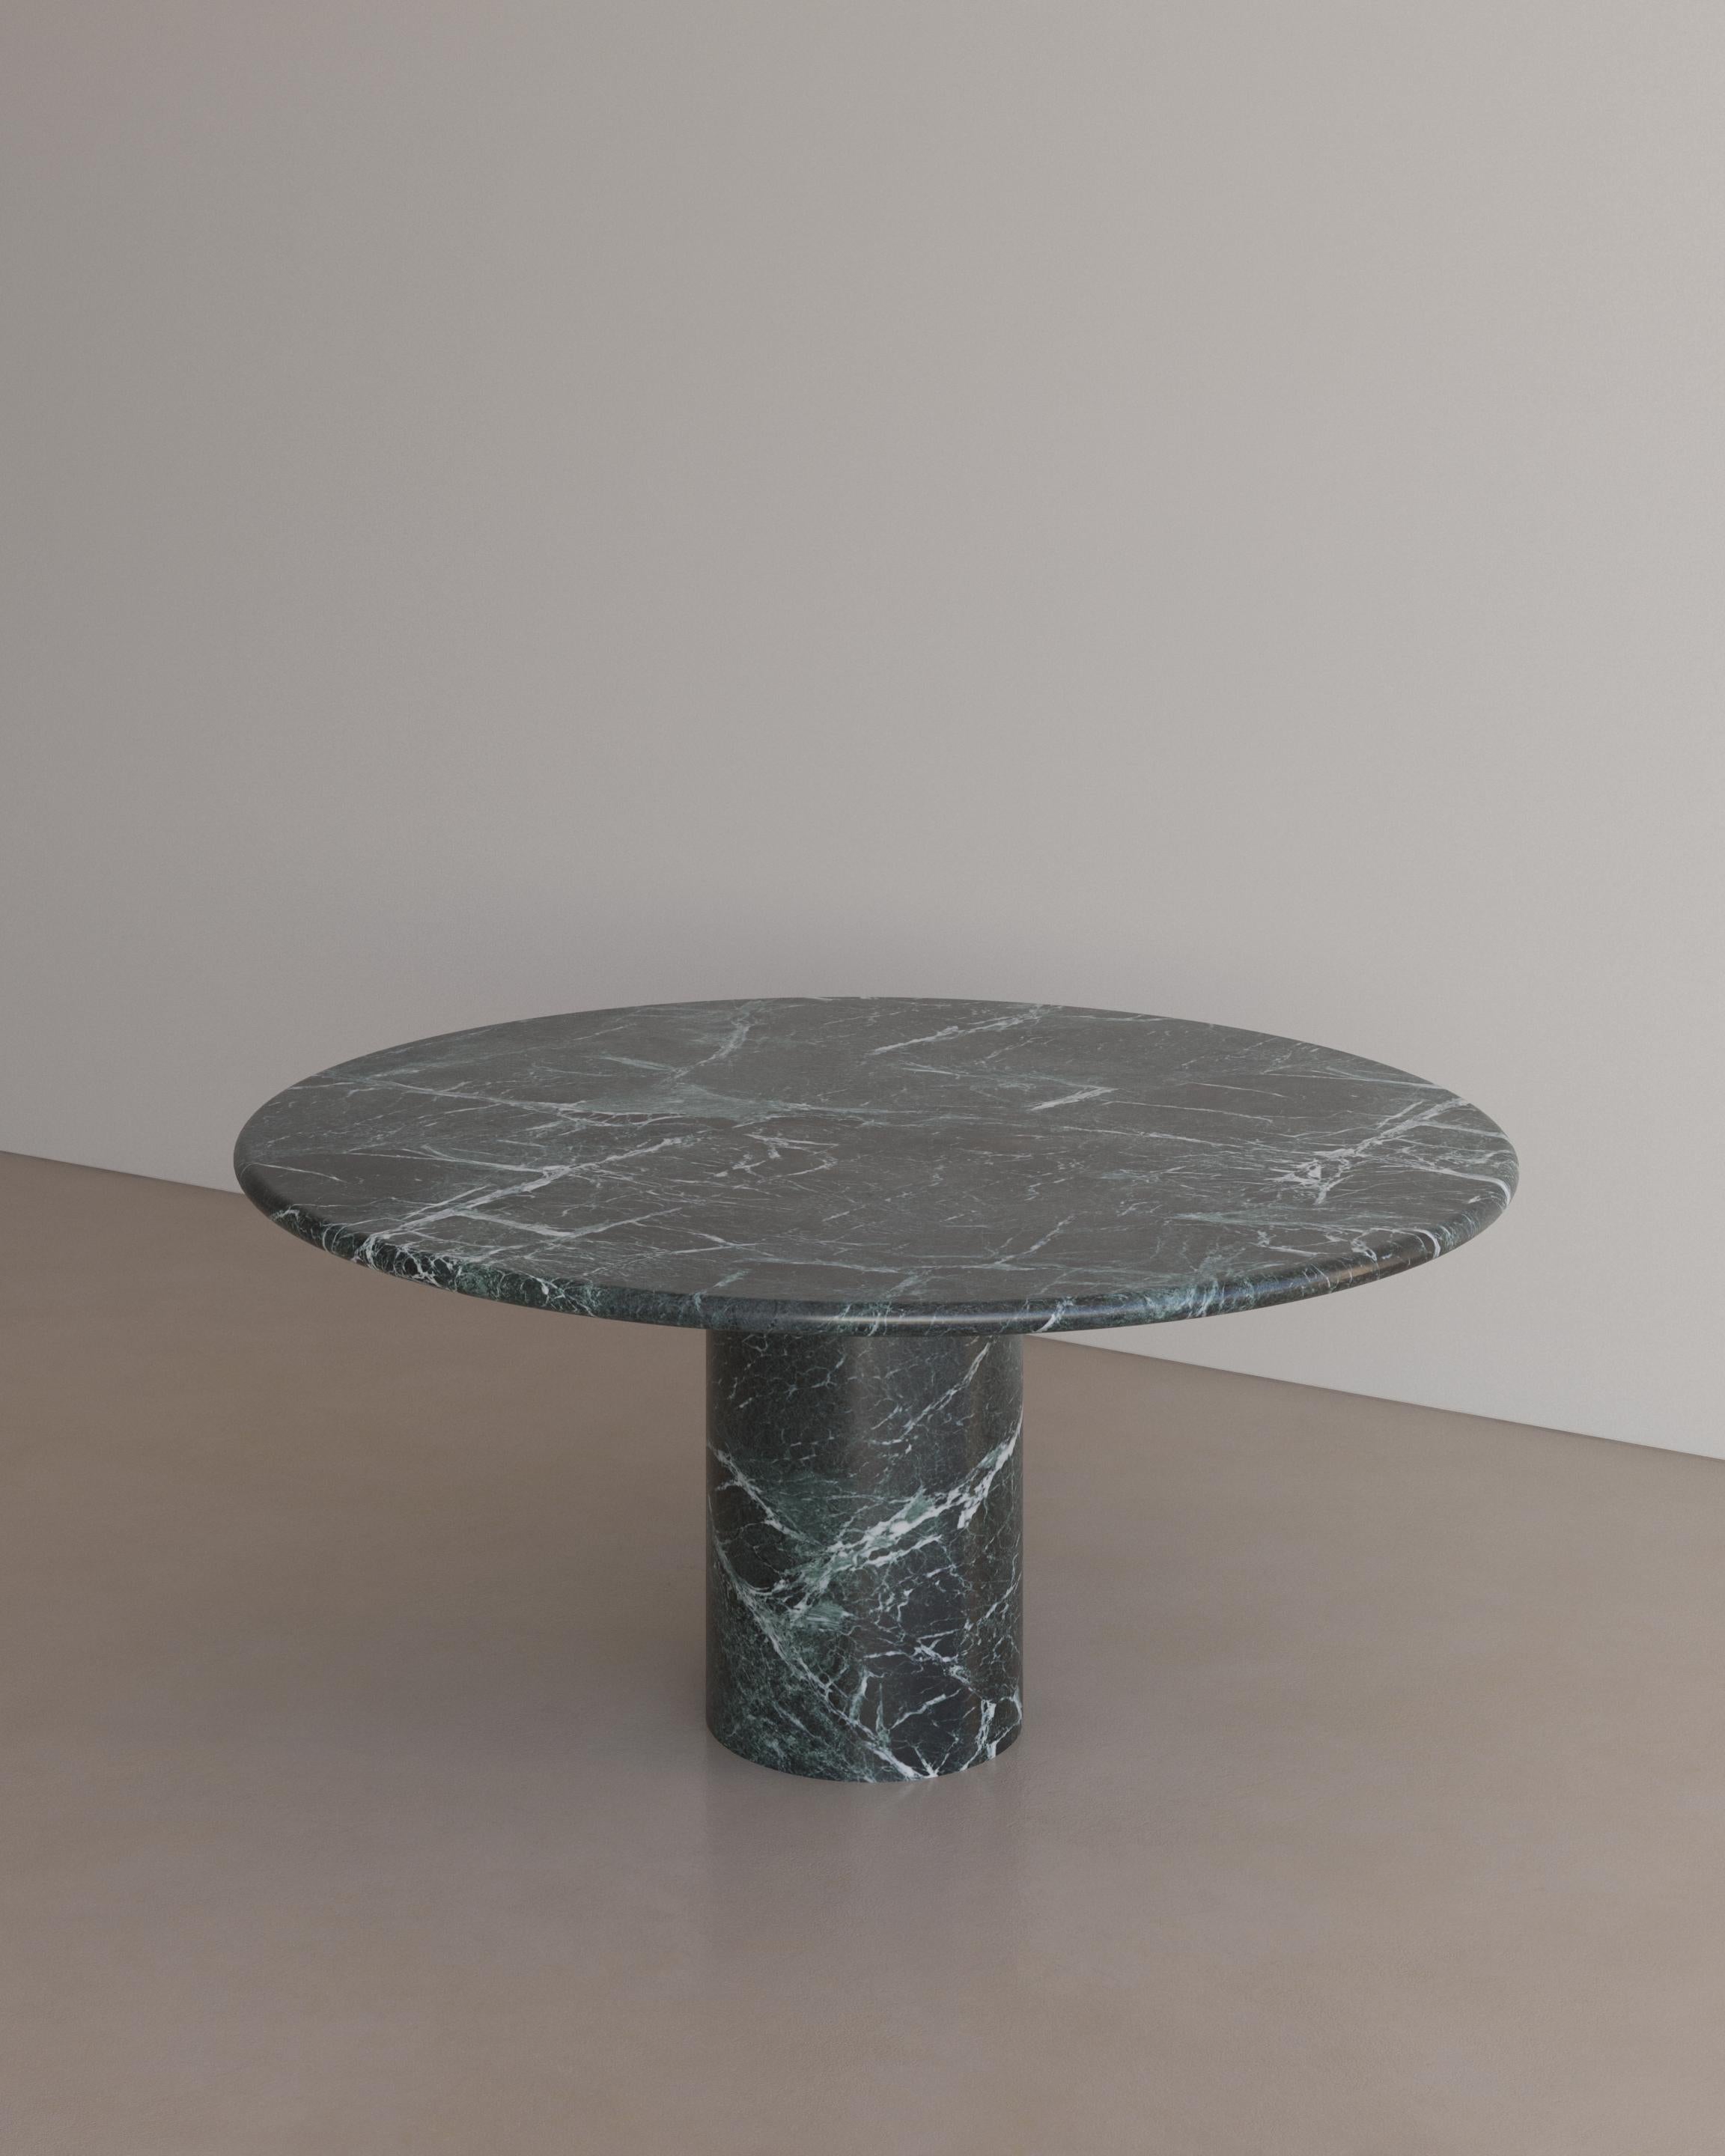 Onyx New York Lilac Marble Voyage Dining Table i by the Essentialist For Sale